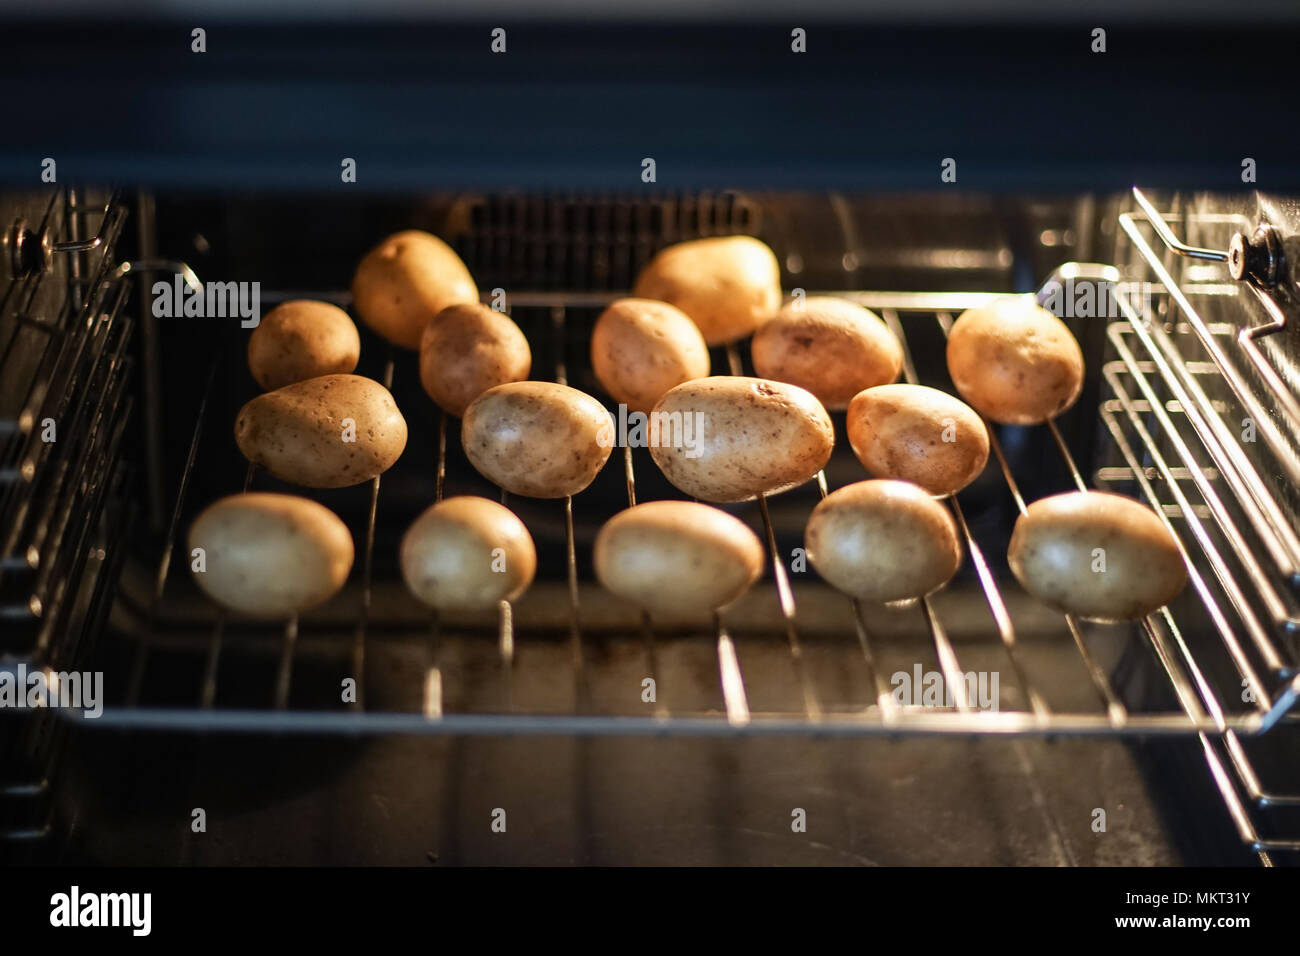 Potatoes in a peel are baked in an oven Stock Photo